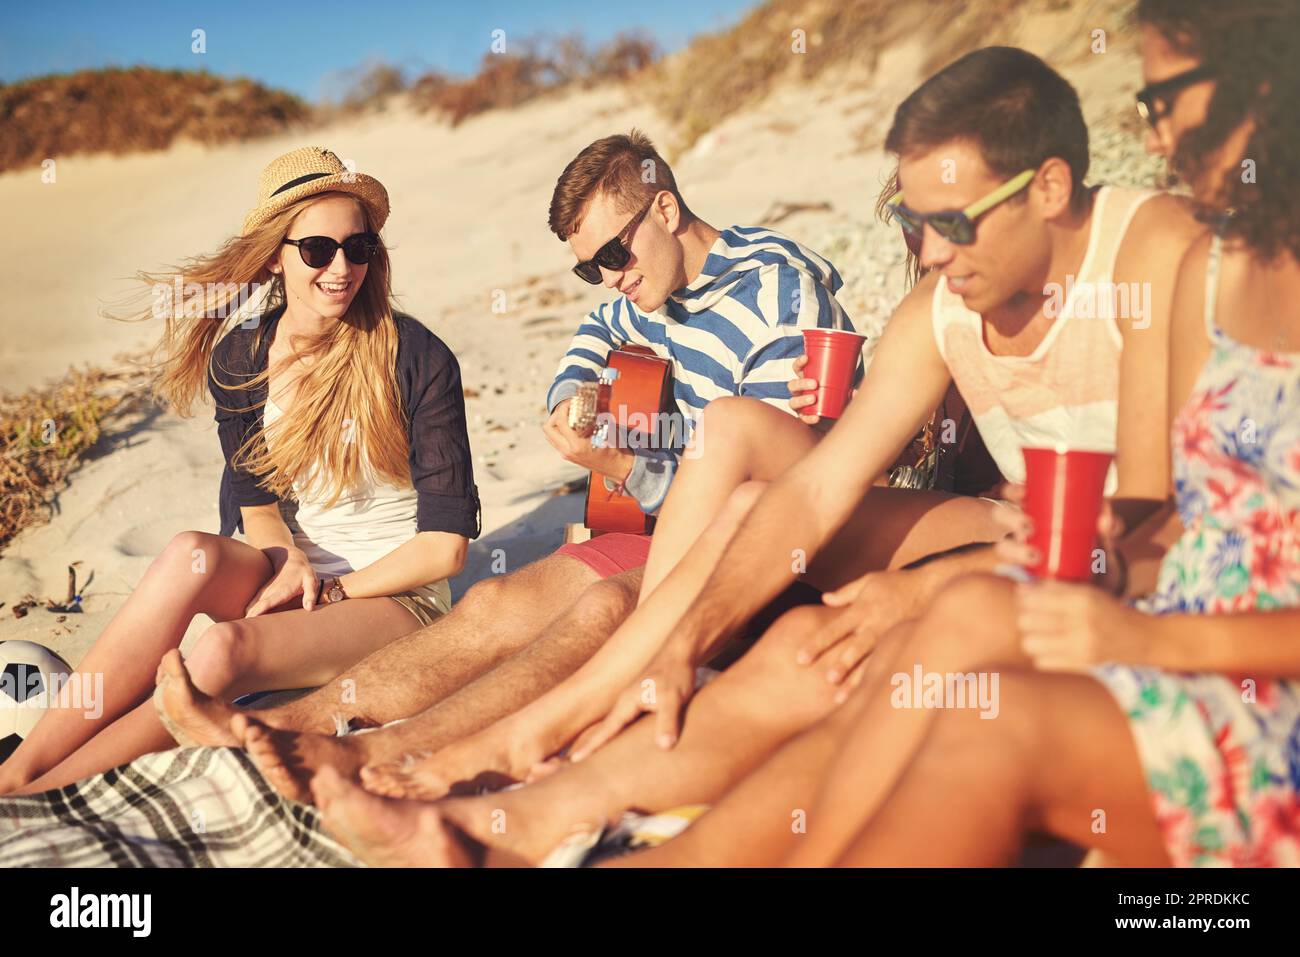 Hes the kind of friend thatll play you a song. a handsome young man playing a guitar for his friends on a summers day at the beach. Stock Photo